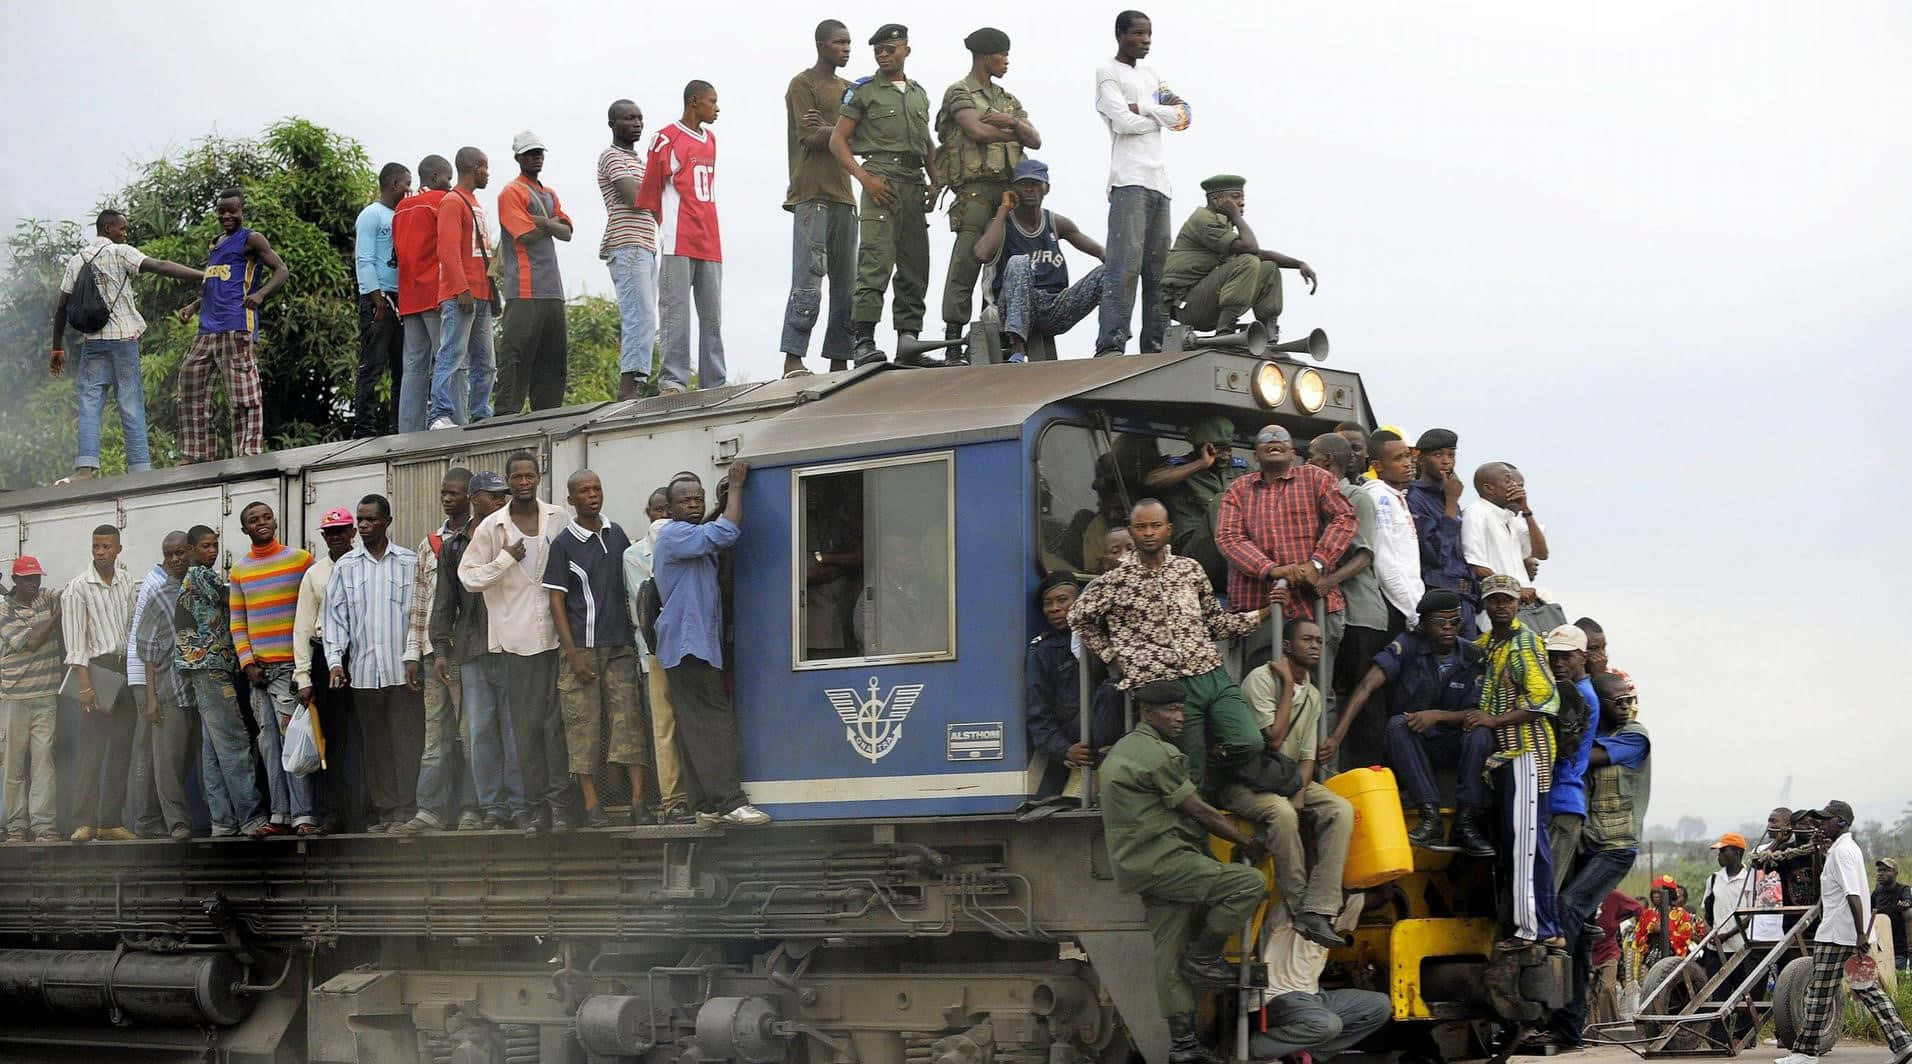 A Group Of People Standing On Top Of A Train